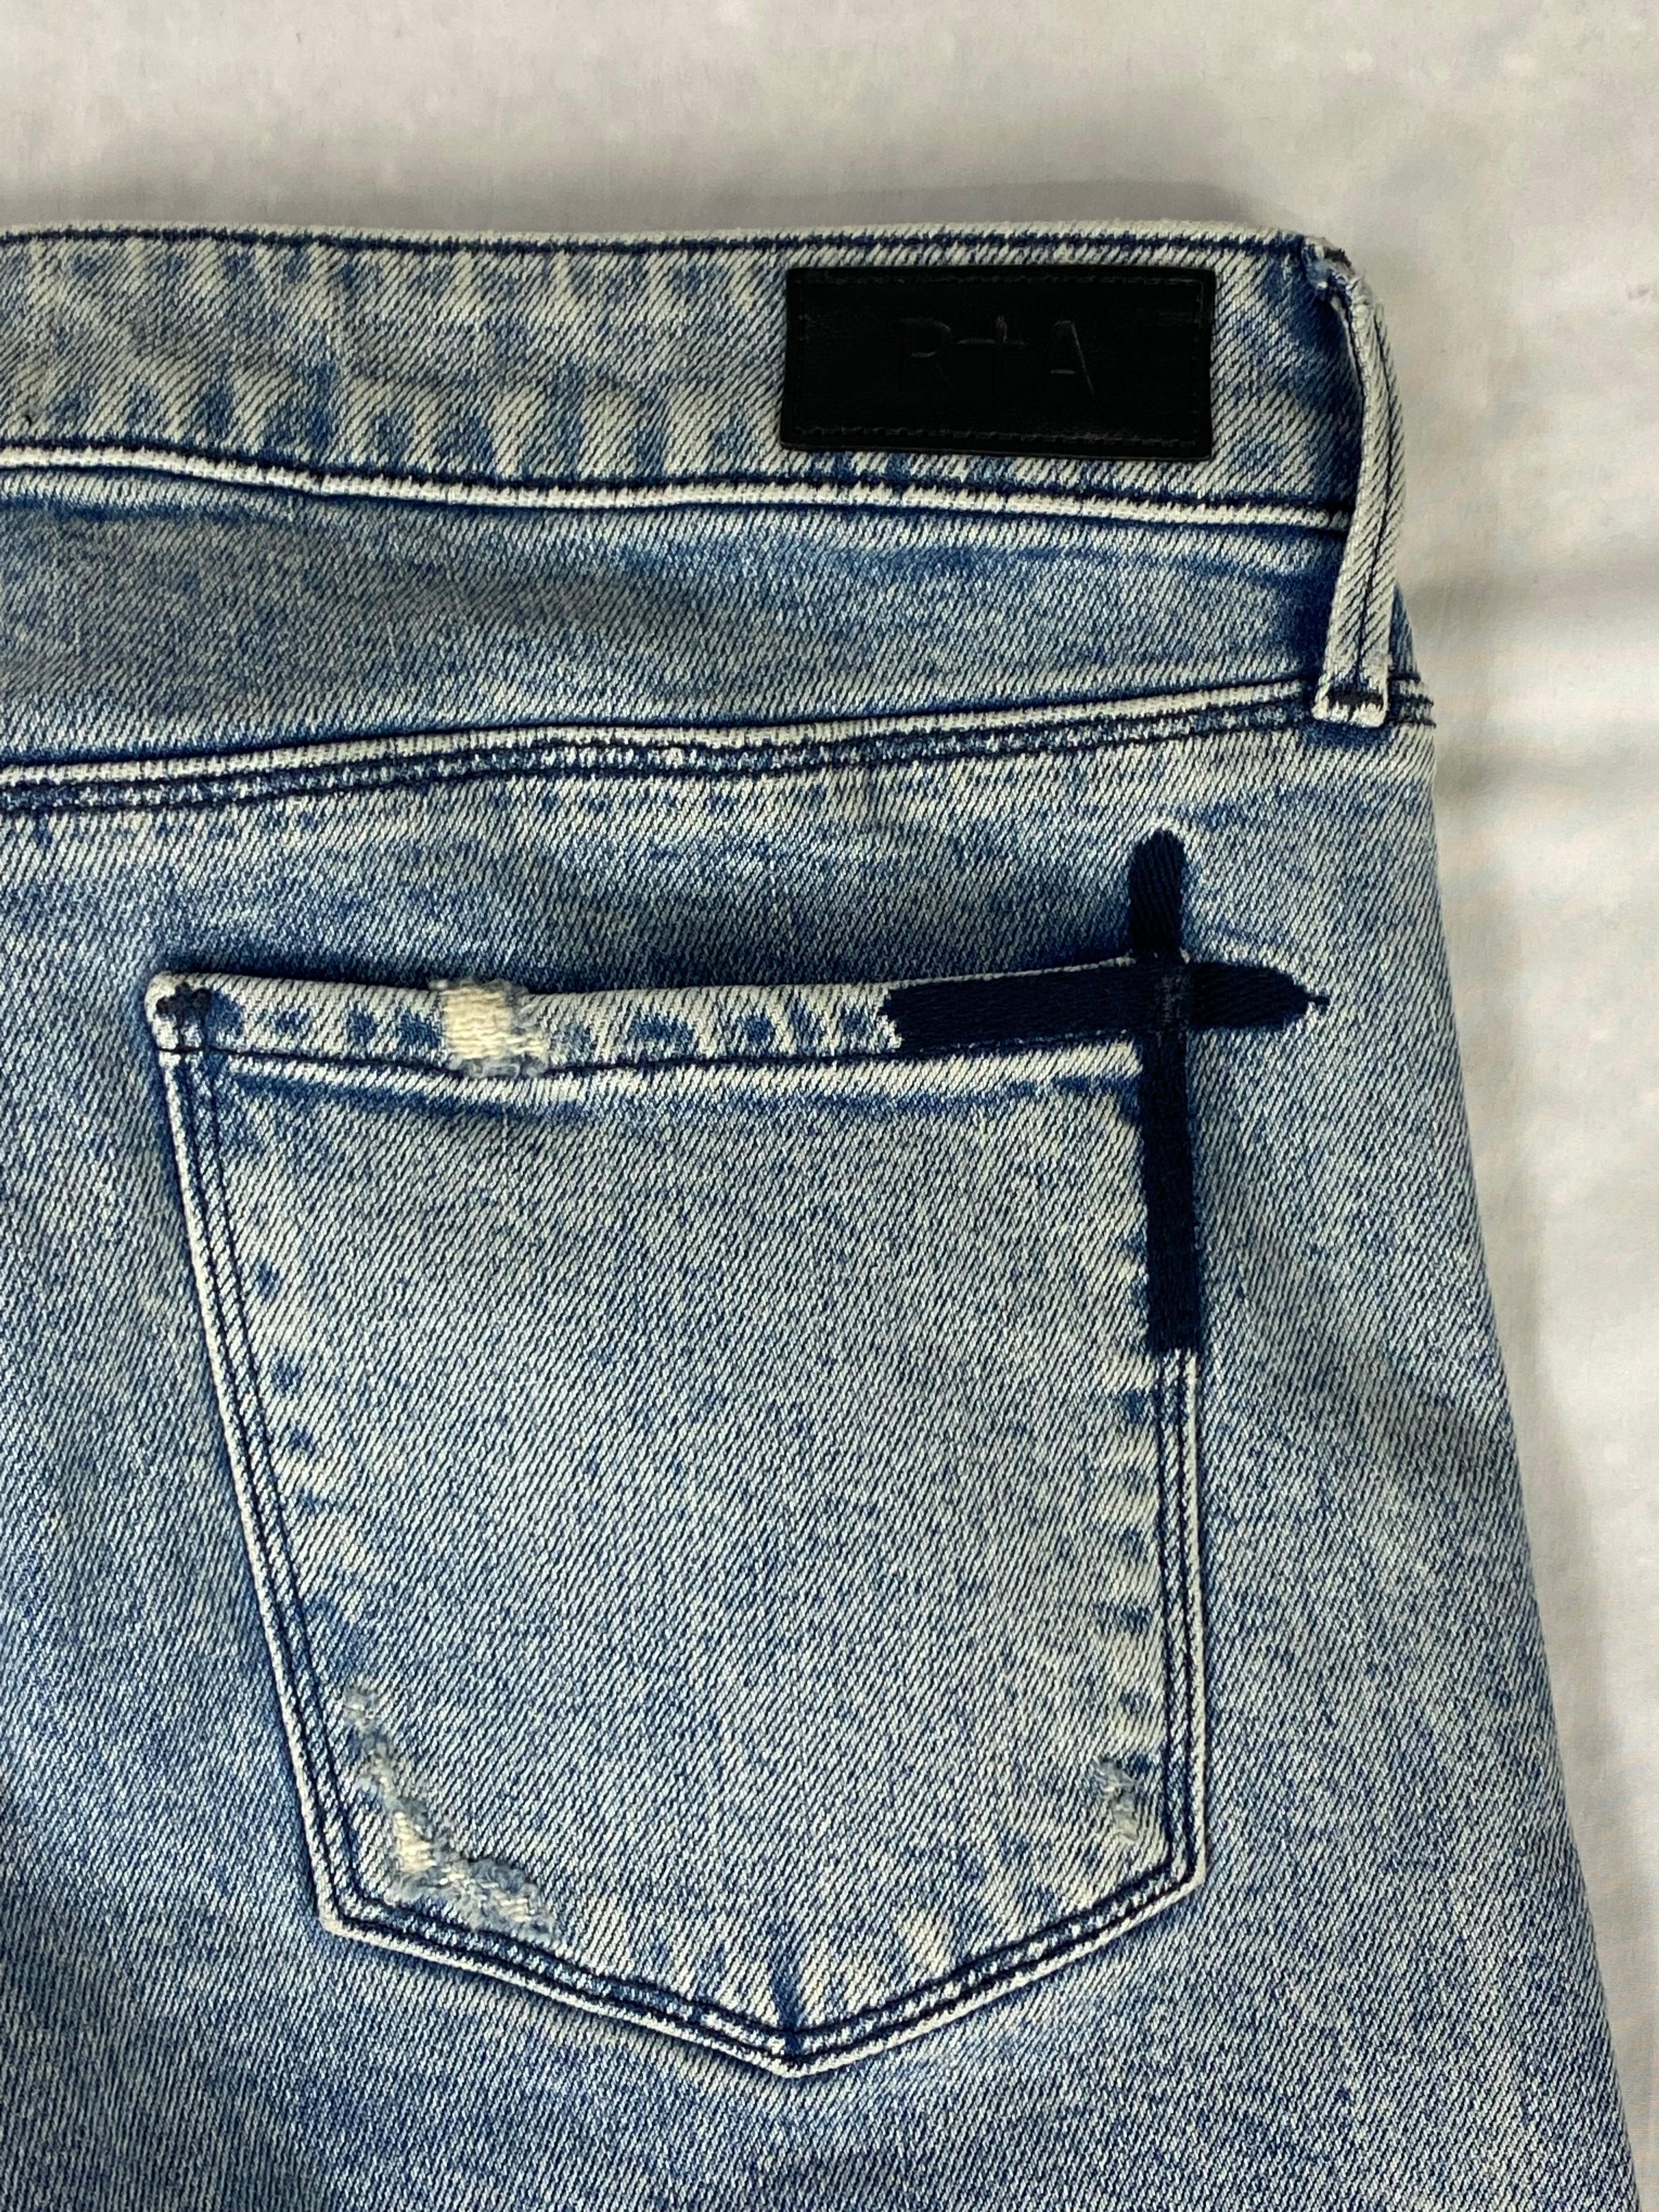 RtA Brand Blue Skinny Jeans, Size 29 In Excellent Condition For Sale In Beverly Hills, CA